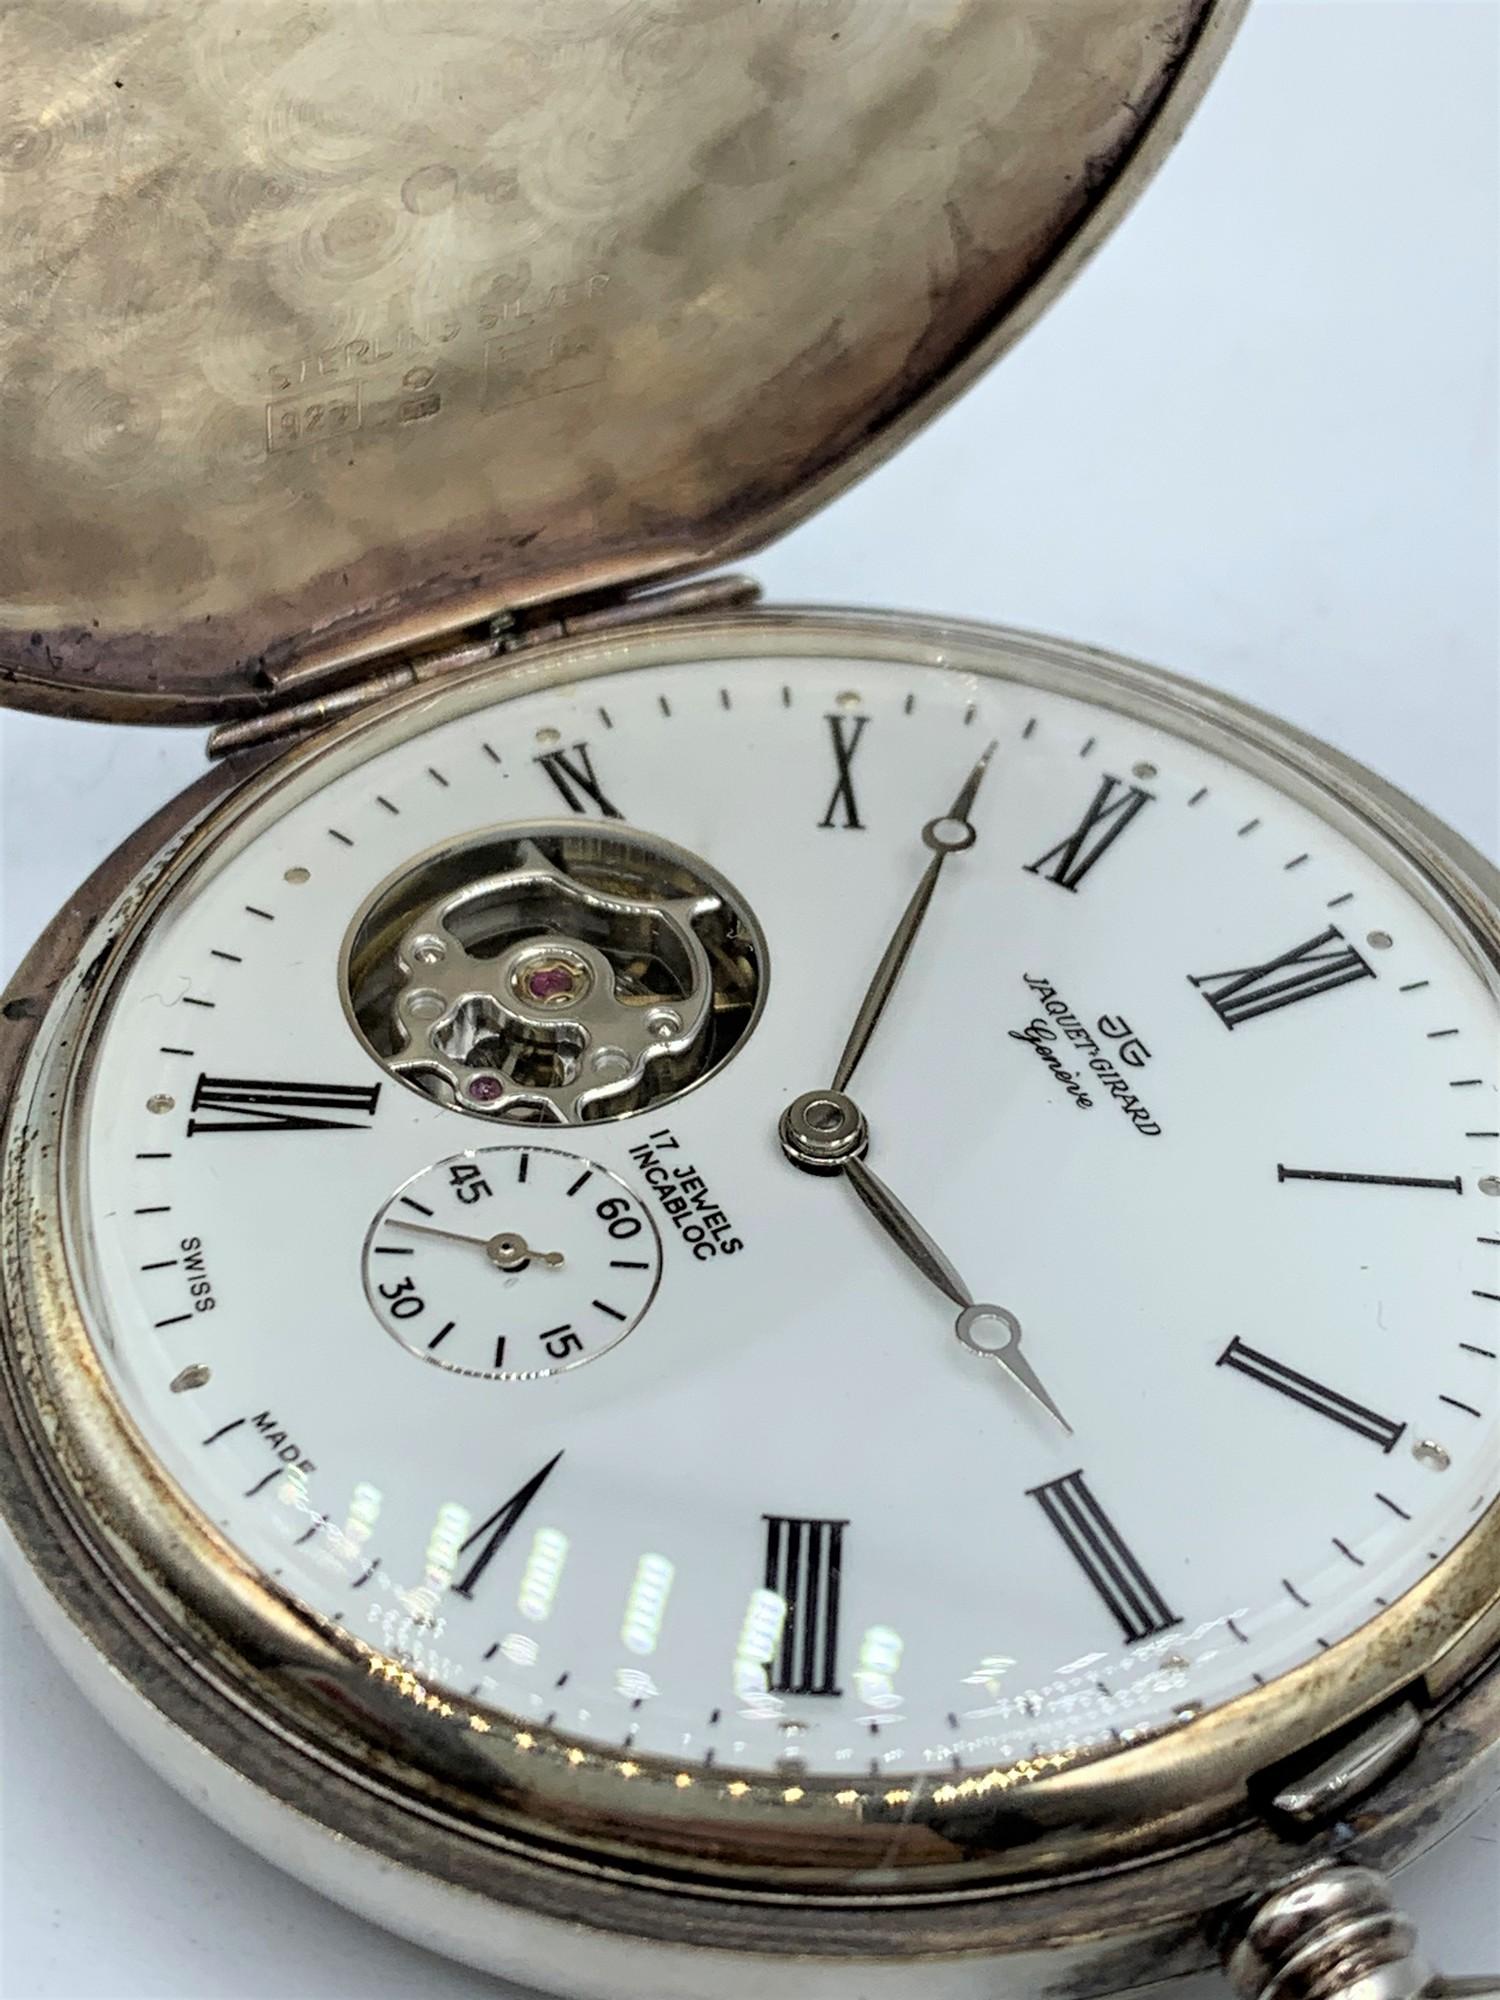 Jaquet Girard Geneve Silver Hunter Pocket Watch with Chains, 17 Jewels Incabloc in working order. - Image 4 of 9